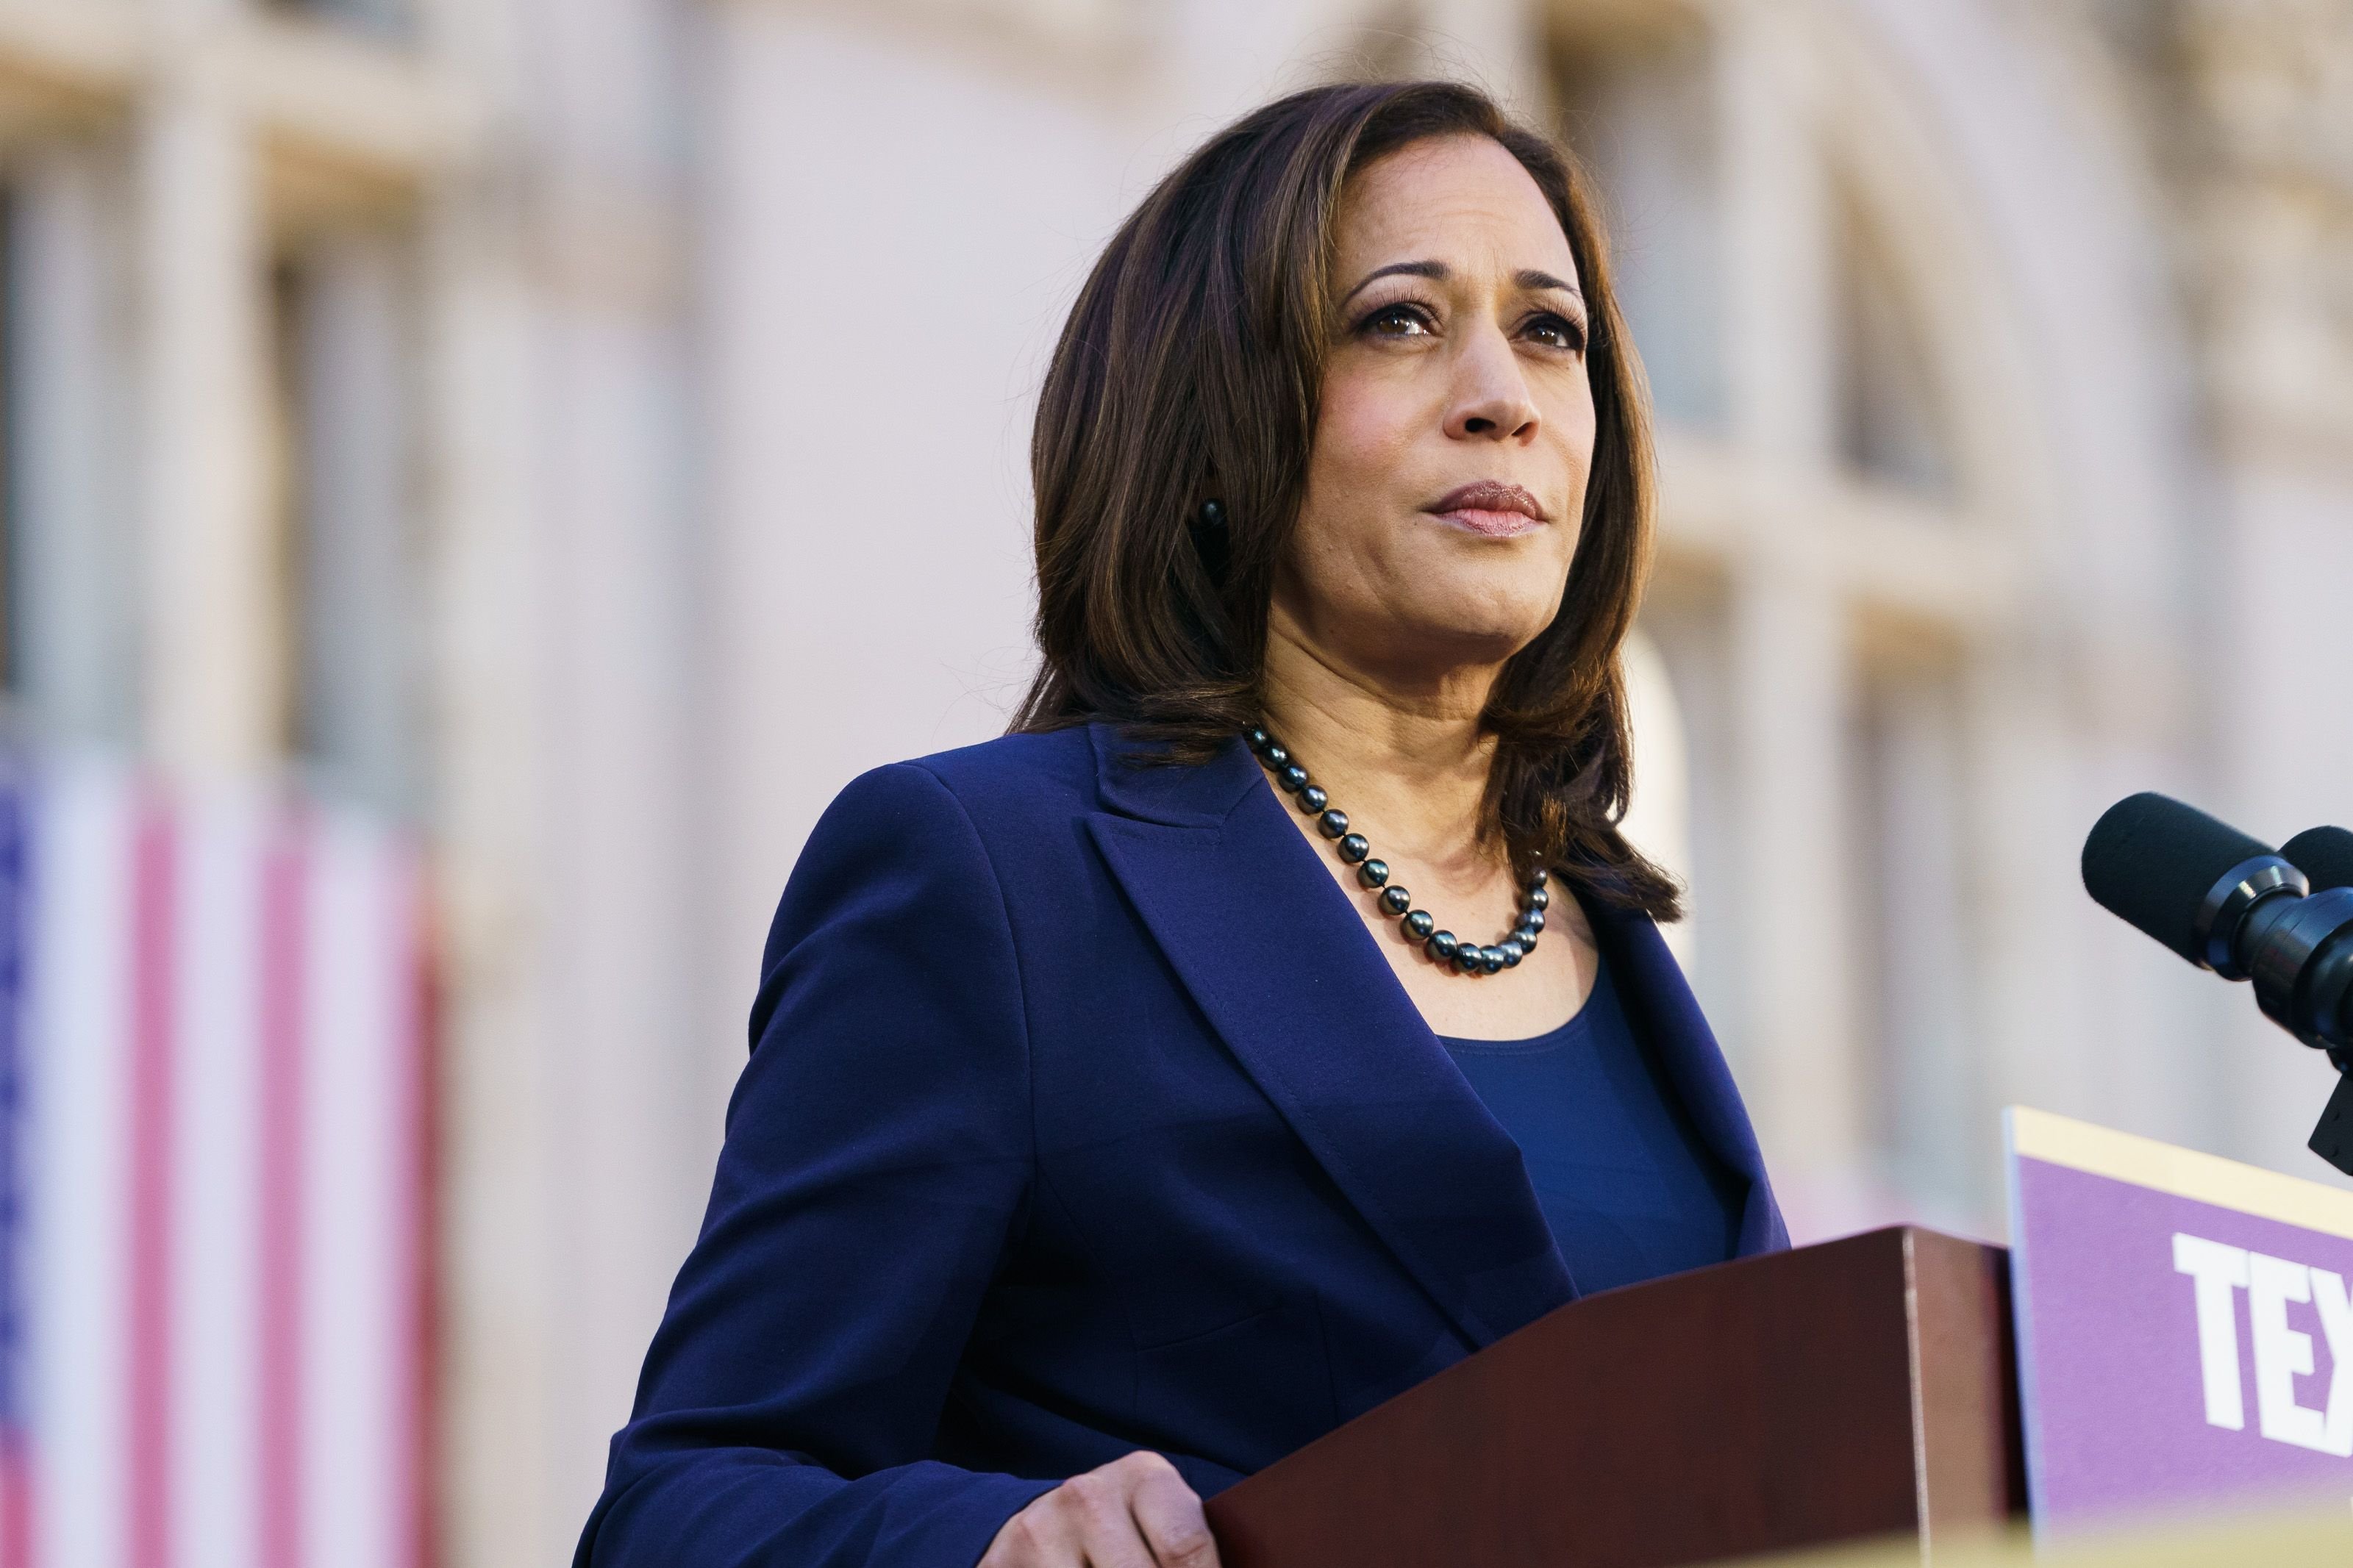 Vice President Kamala Harris speaks to her supporters during her presidential campaign launch rally in Frank H. Ogawa Plaza on January 27, 2019, in Oakland, California. | Photo: Getty Images